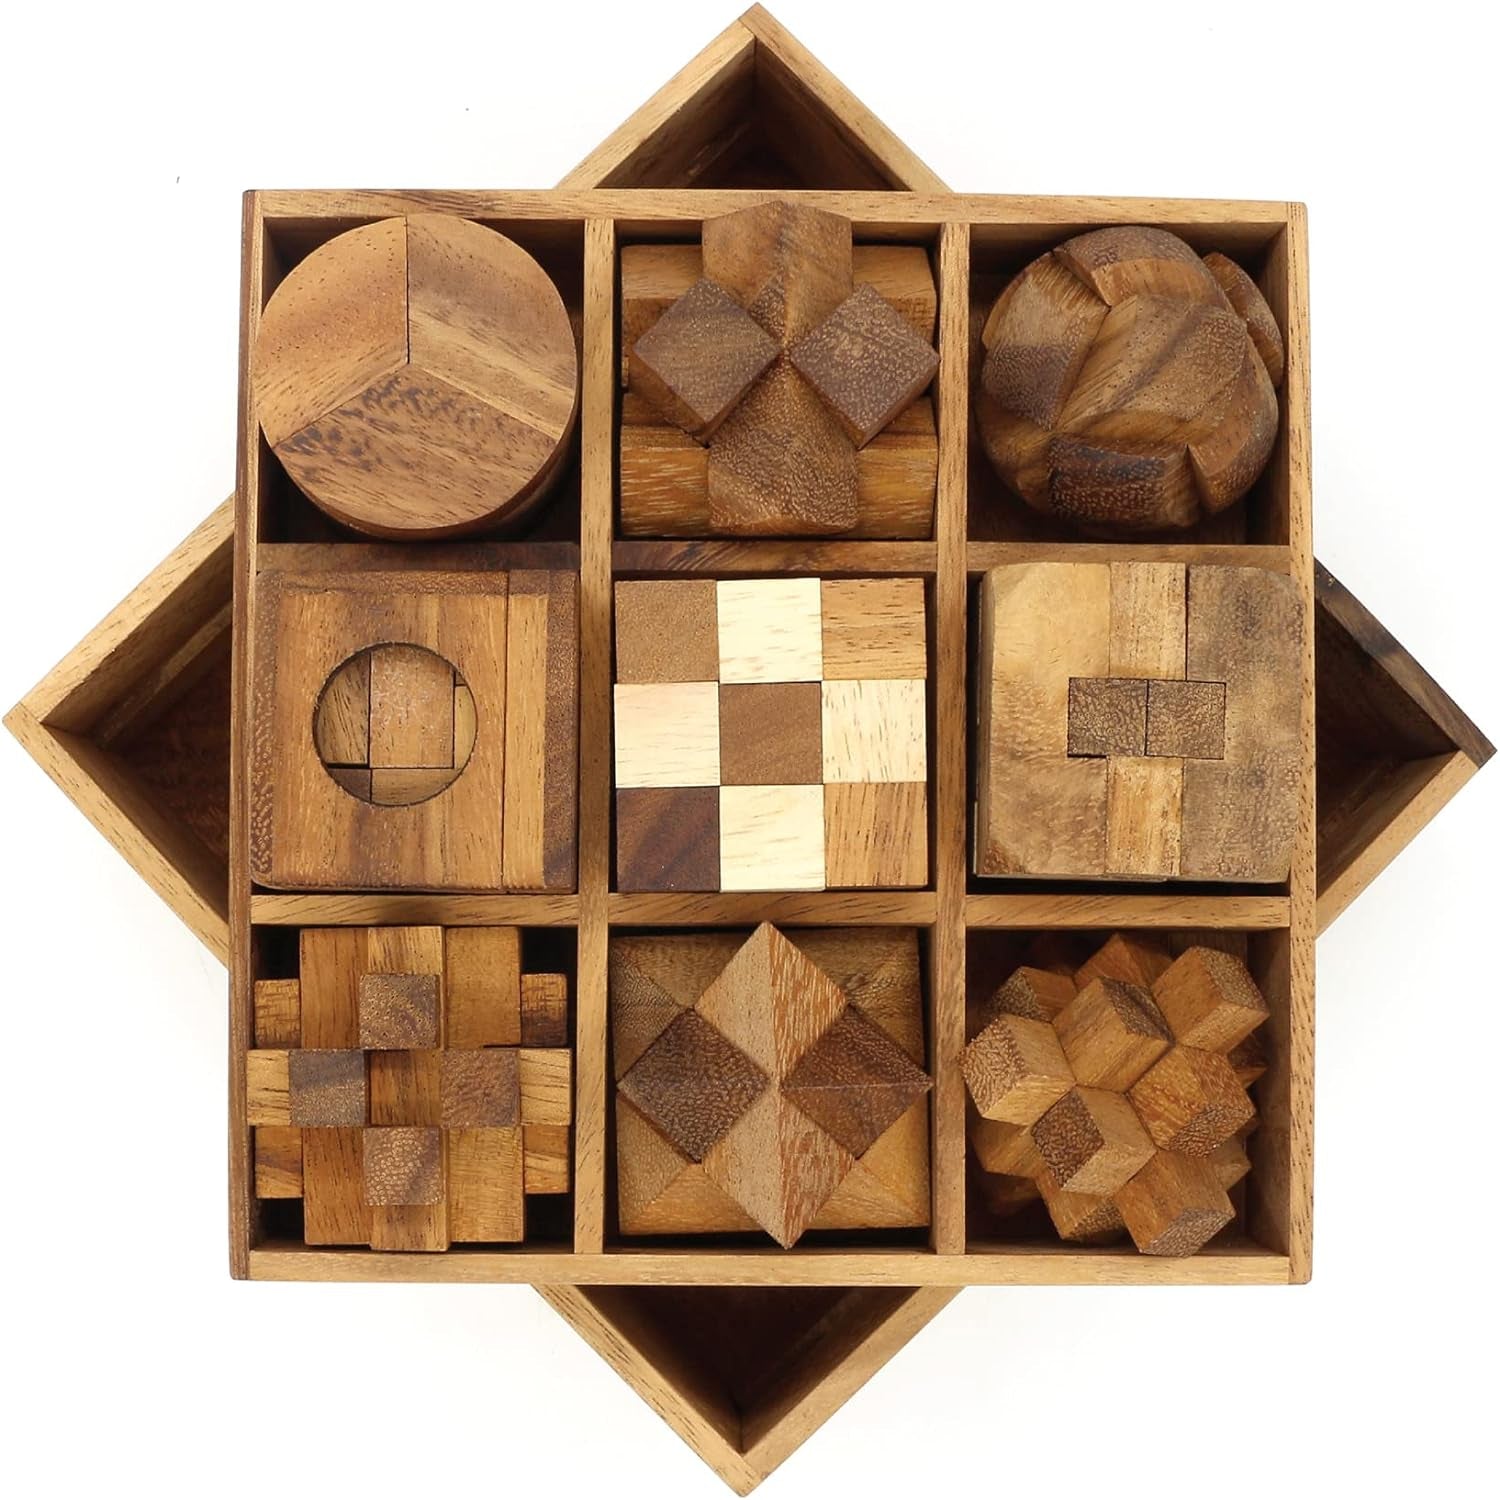 9 Puzzles in a Box - Wooden Brain Teaser Puzzles, 3D Puzzles for Adults, Educational Kids Games, Mind Puzzles for Adults and Brain Games for Kids, Ideal for Birthday Gifts and Patio Decor